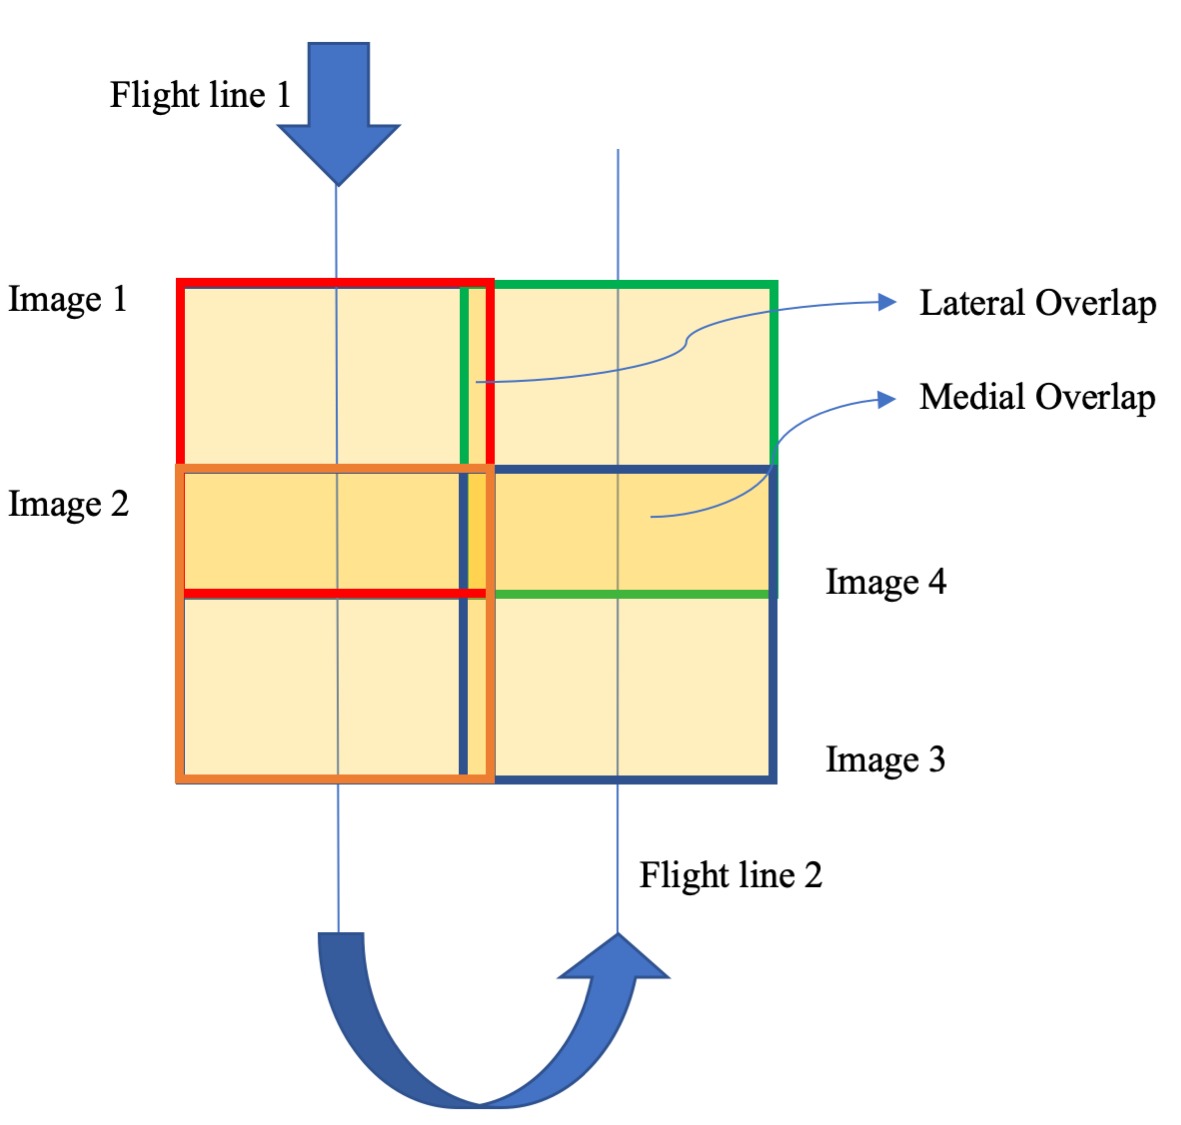 Basic schematic of flight line with lateral and medial overlap shown.